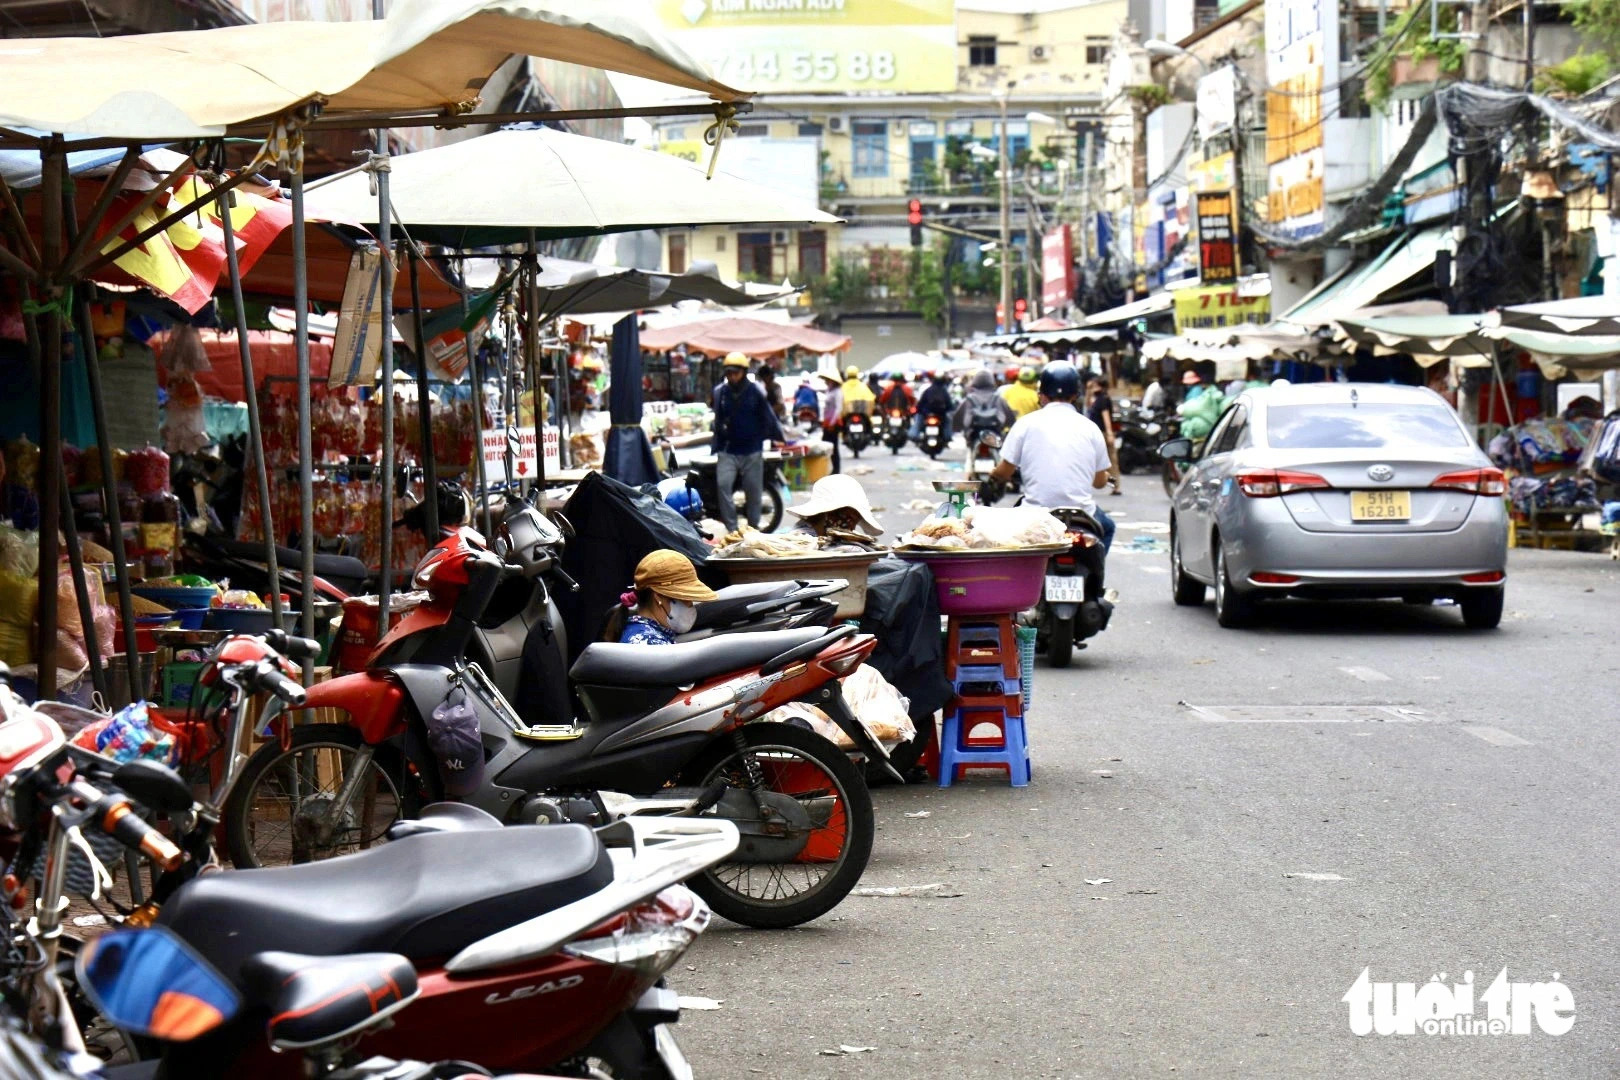 Many streets adjacent to Ba Chieu Market in Binh Thanh District, Ho Chi Minh City were found to have been encroached on by market vendors and street hawkers. Photo: Ngoc Quy / Tuoi Tre